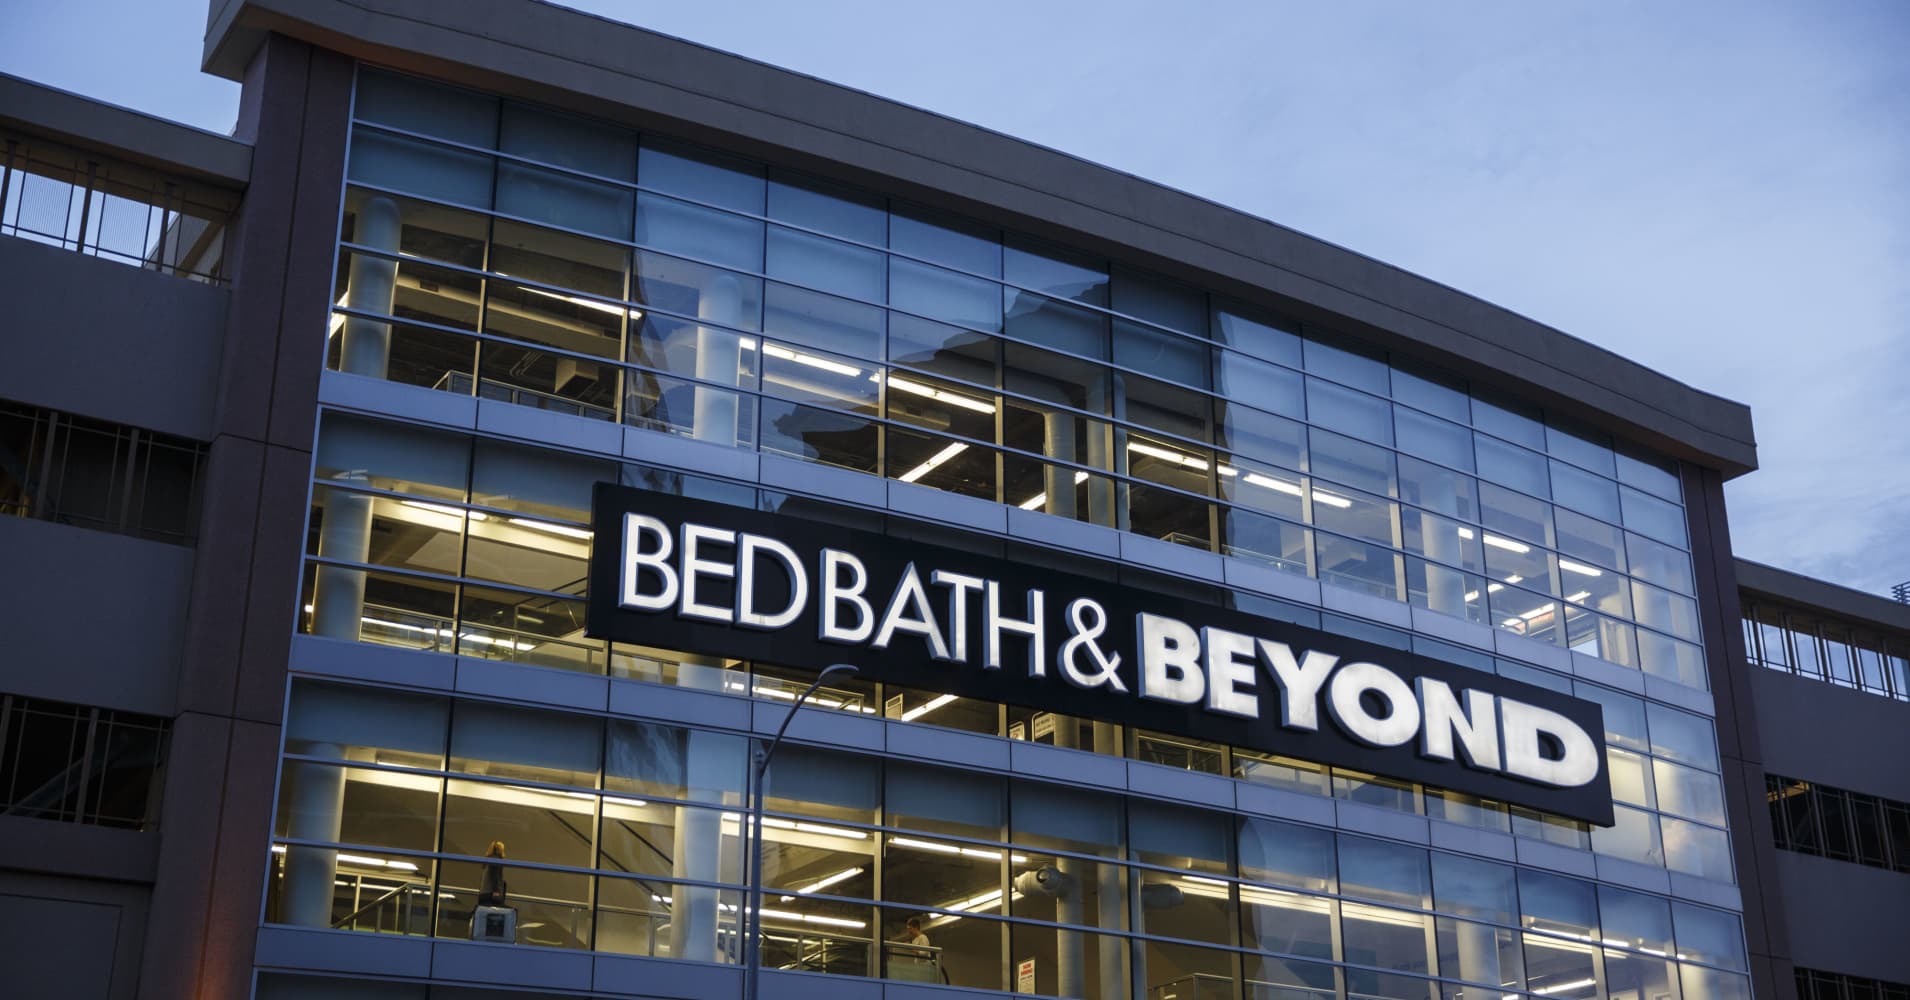 Bed Bath & Beyond soars after activists prepare to try to oust board